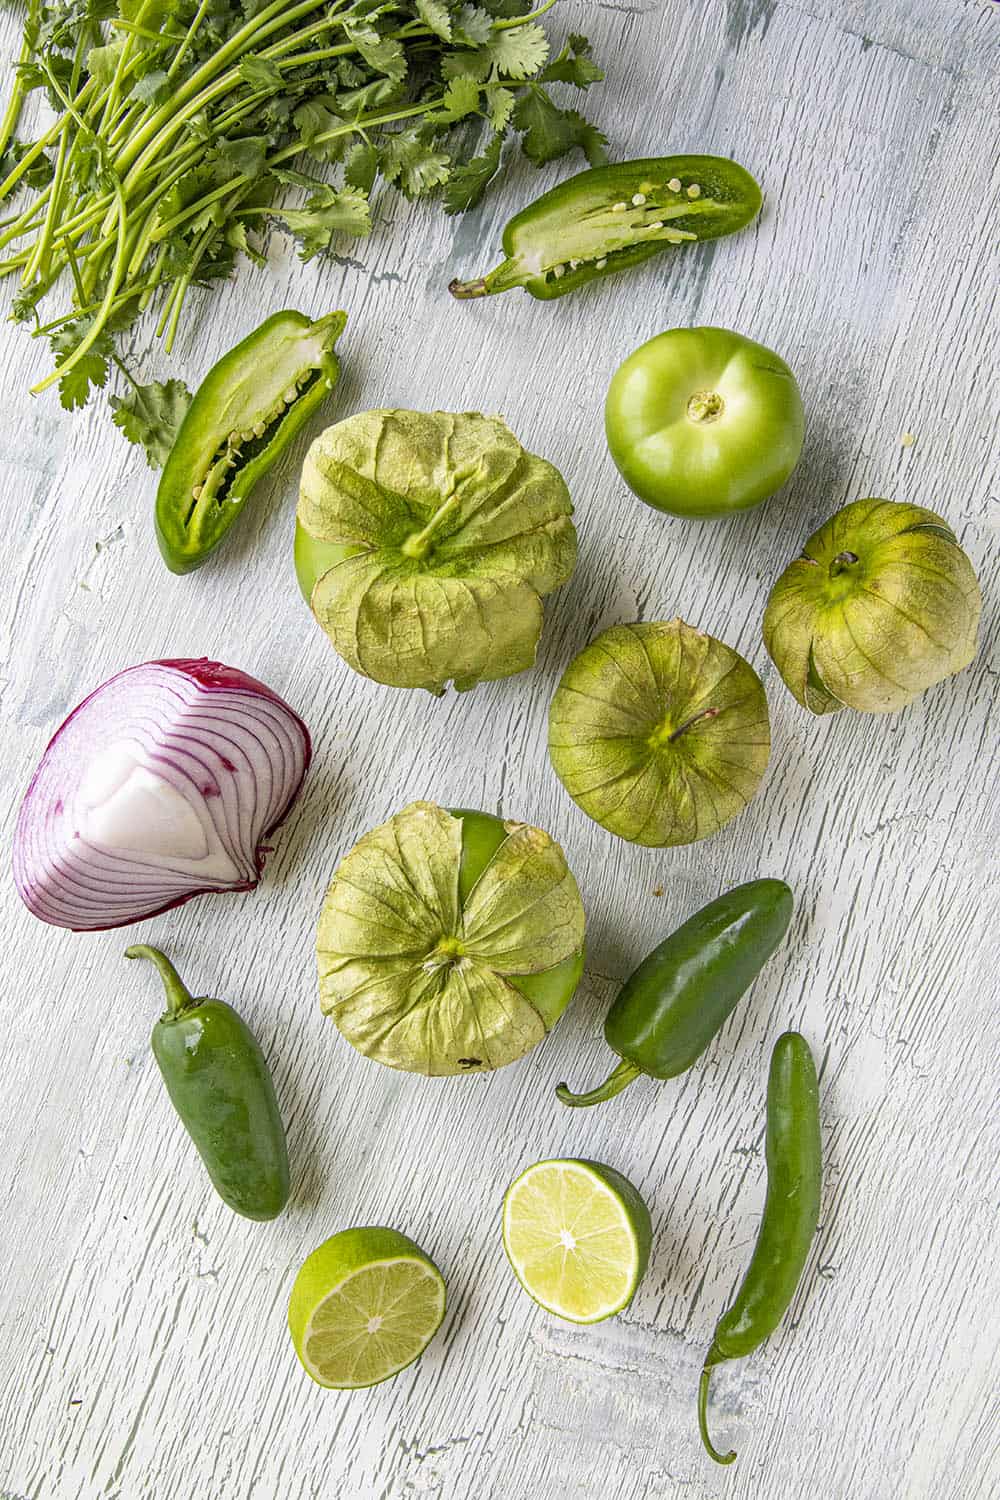 Ingredients for making tomatillo sauce